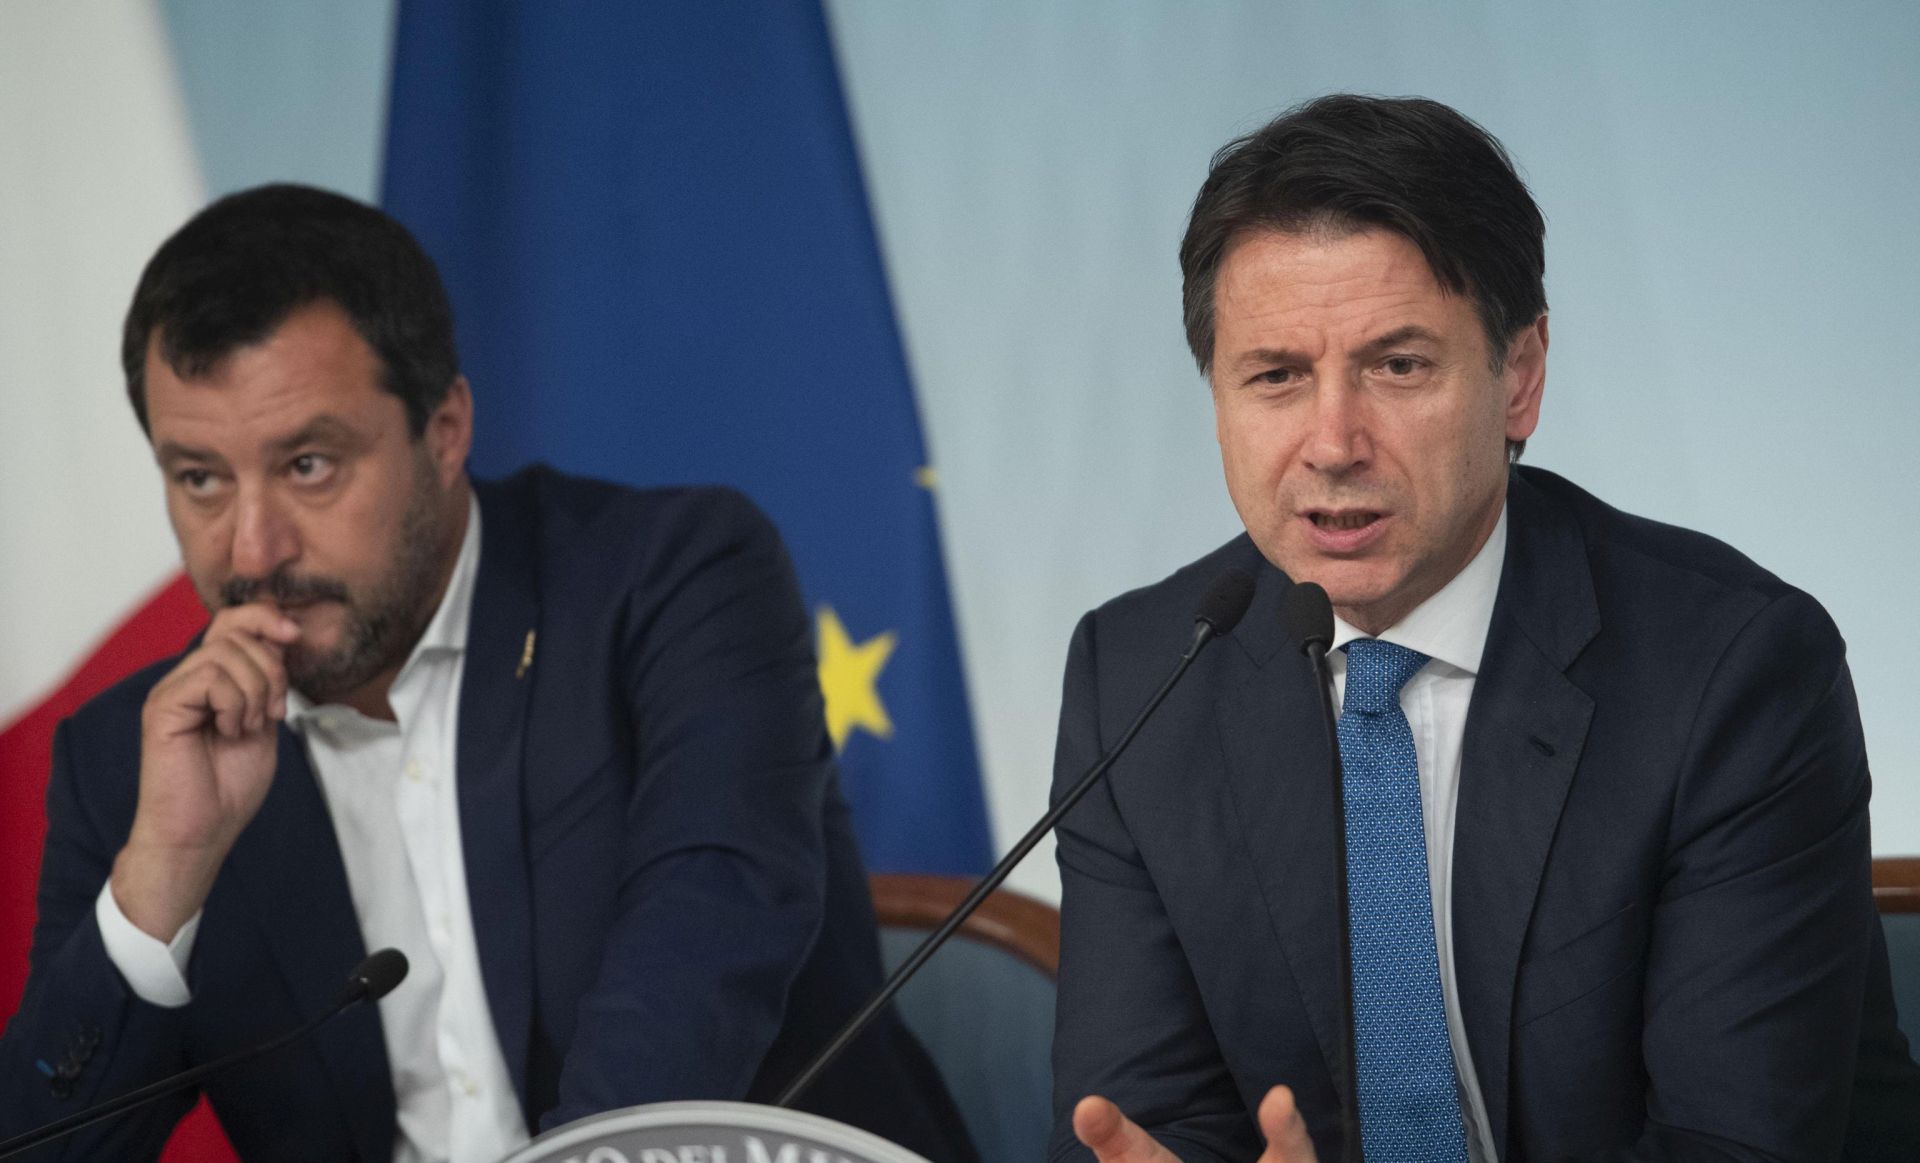 epa07641405 Italian Prime Minister Giuseppe Conte (R) with Italian Deputy Premier and Interior Minister, Matteo Salvini, attend a press conference after a Cabinet meeting at Chigi Palace in Rome, Italy, 11 June 2019.  EPA/MAURIZIO BRAMBATTI